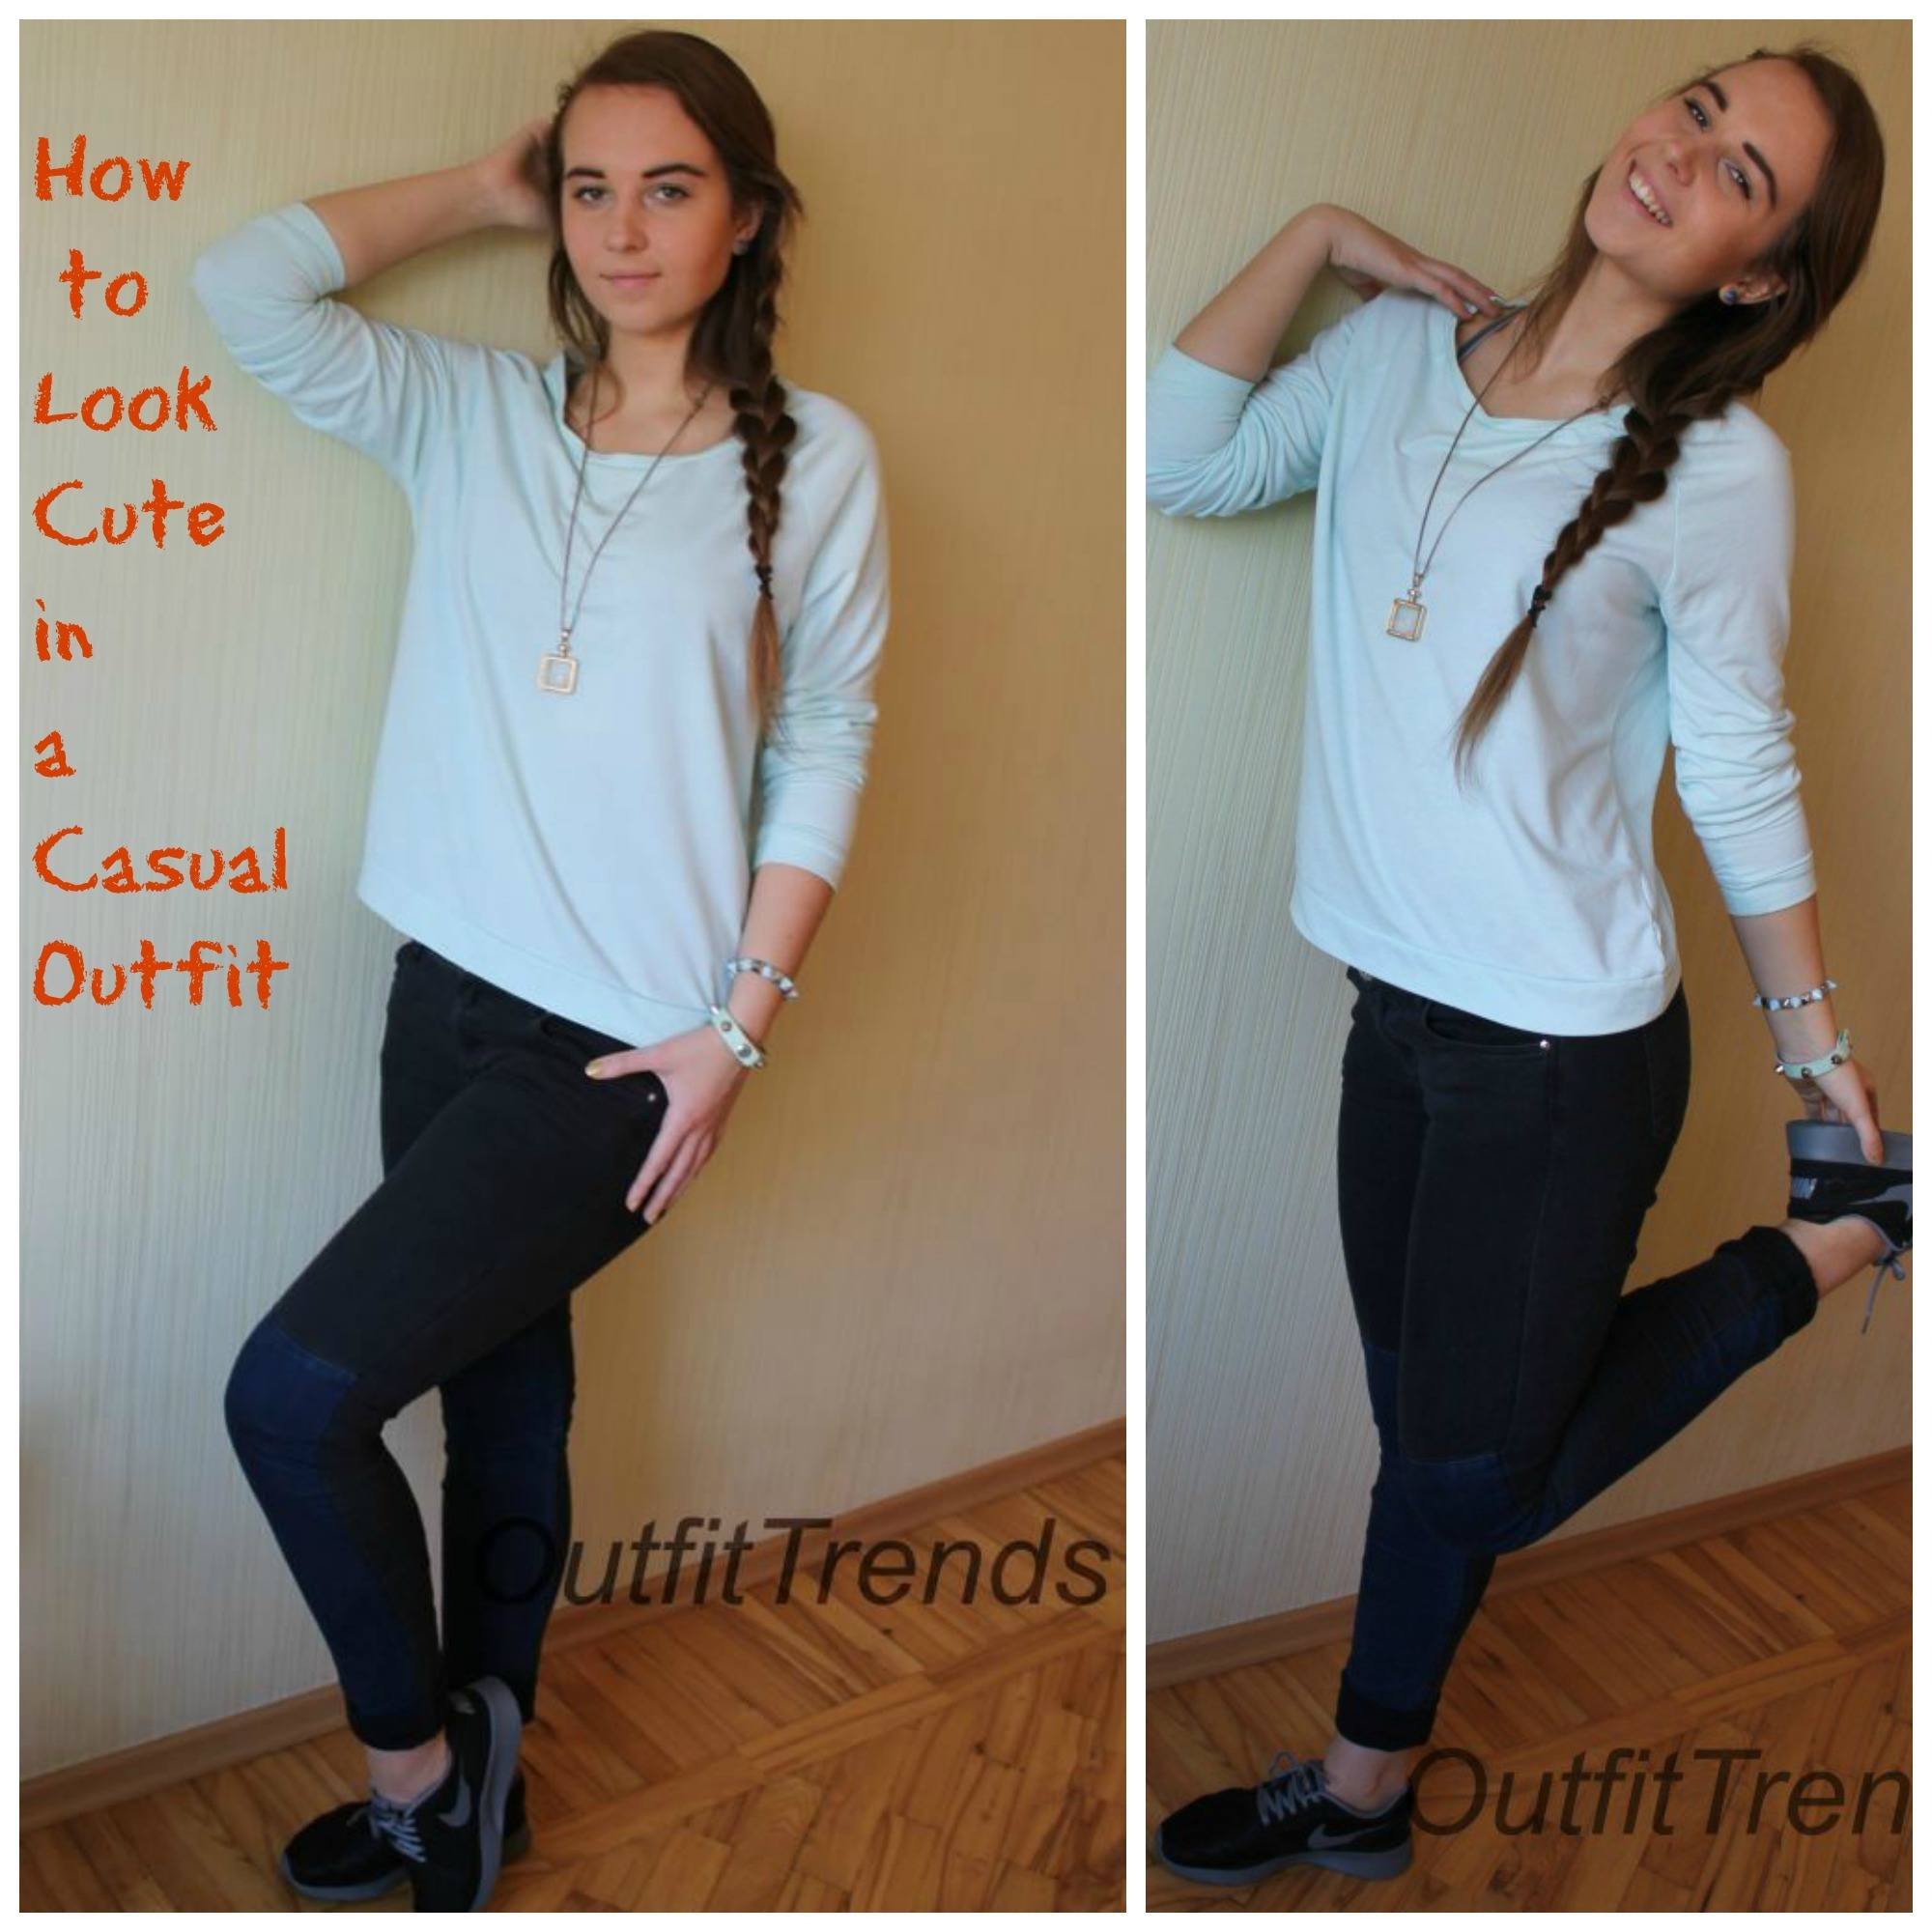 How to Look Cute in a Casual Outfit - Fashion Tips for Teens